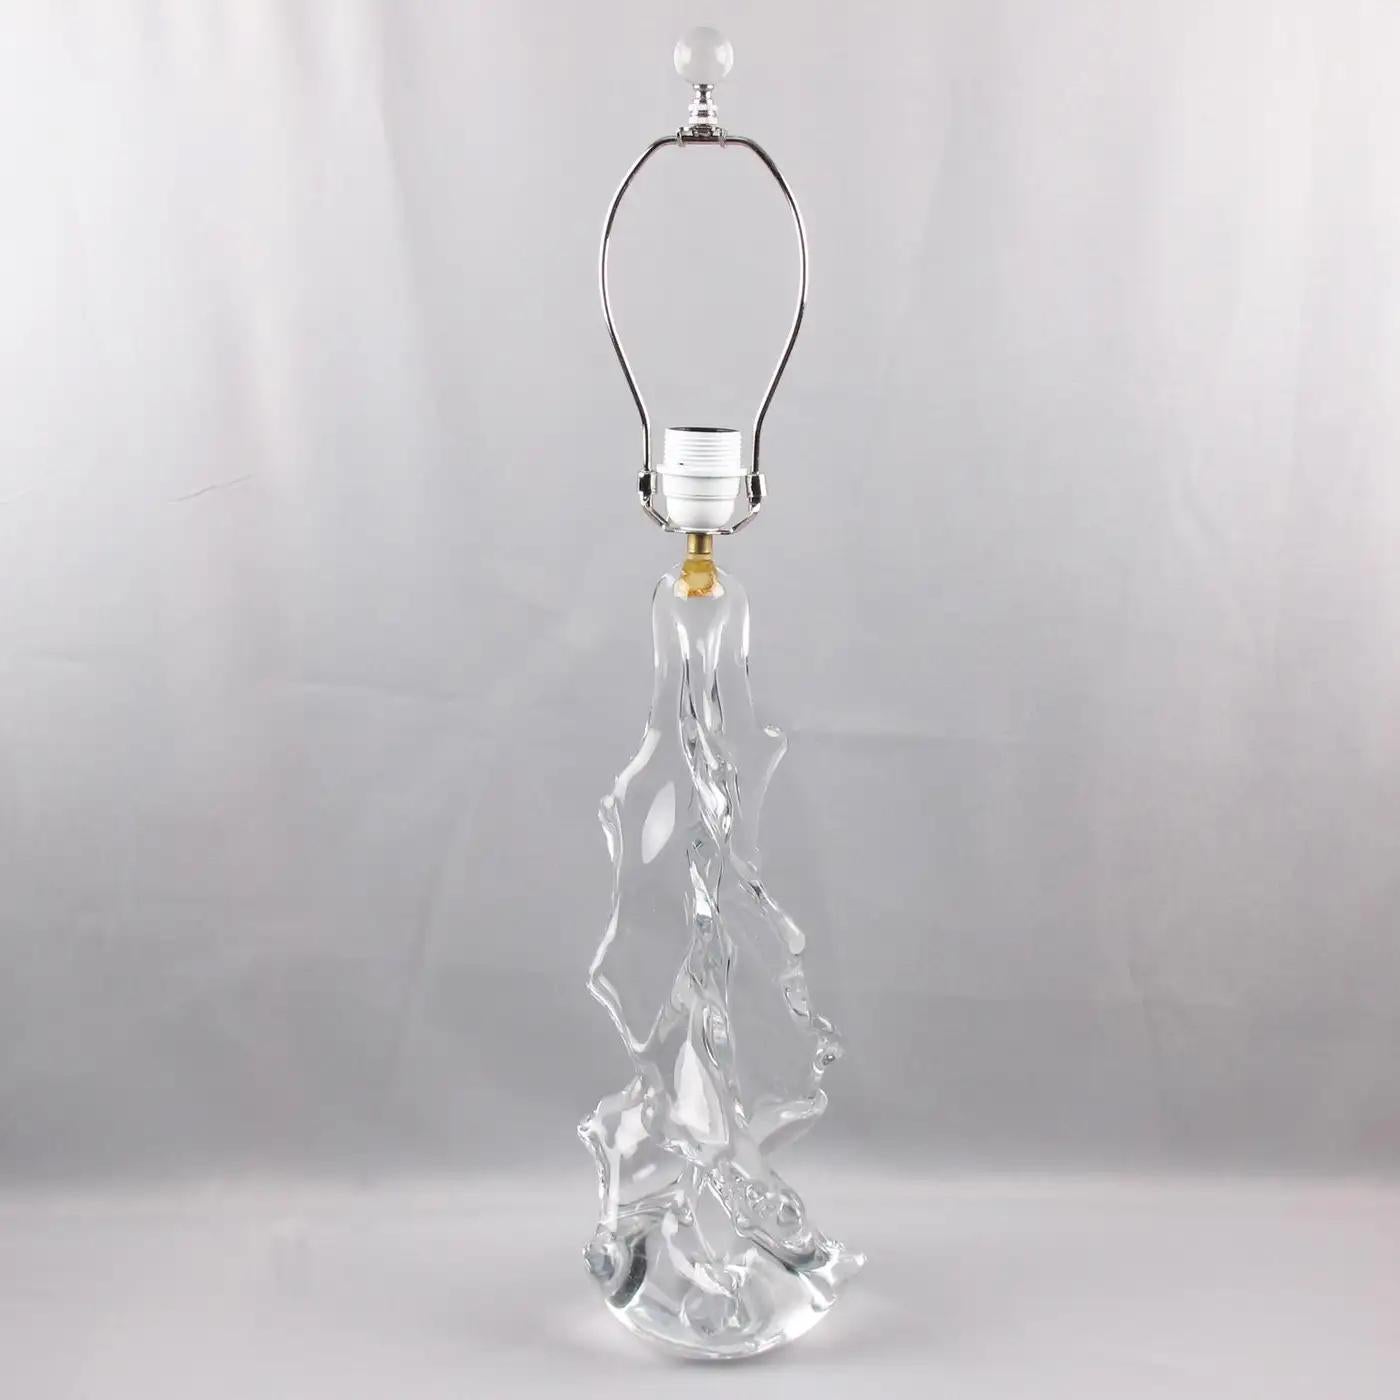 Charles Schneider France designed this lovely art Glass table or desk lamp. The mouth-blown clear crystal has an abstract design featuring a giant Christmas tree in a curved swirl-like form. The wiring was recently updated to fit US standards. The